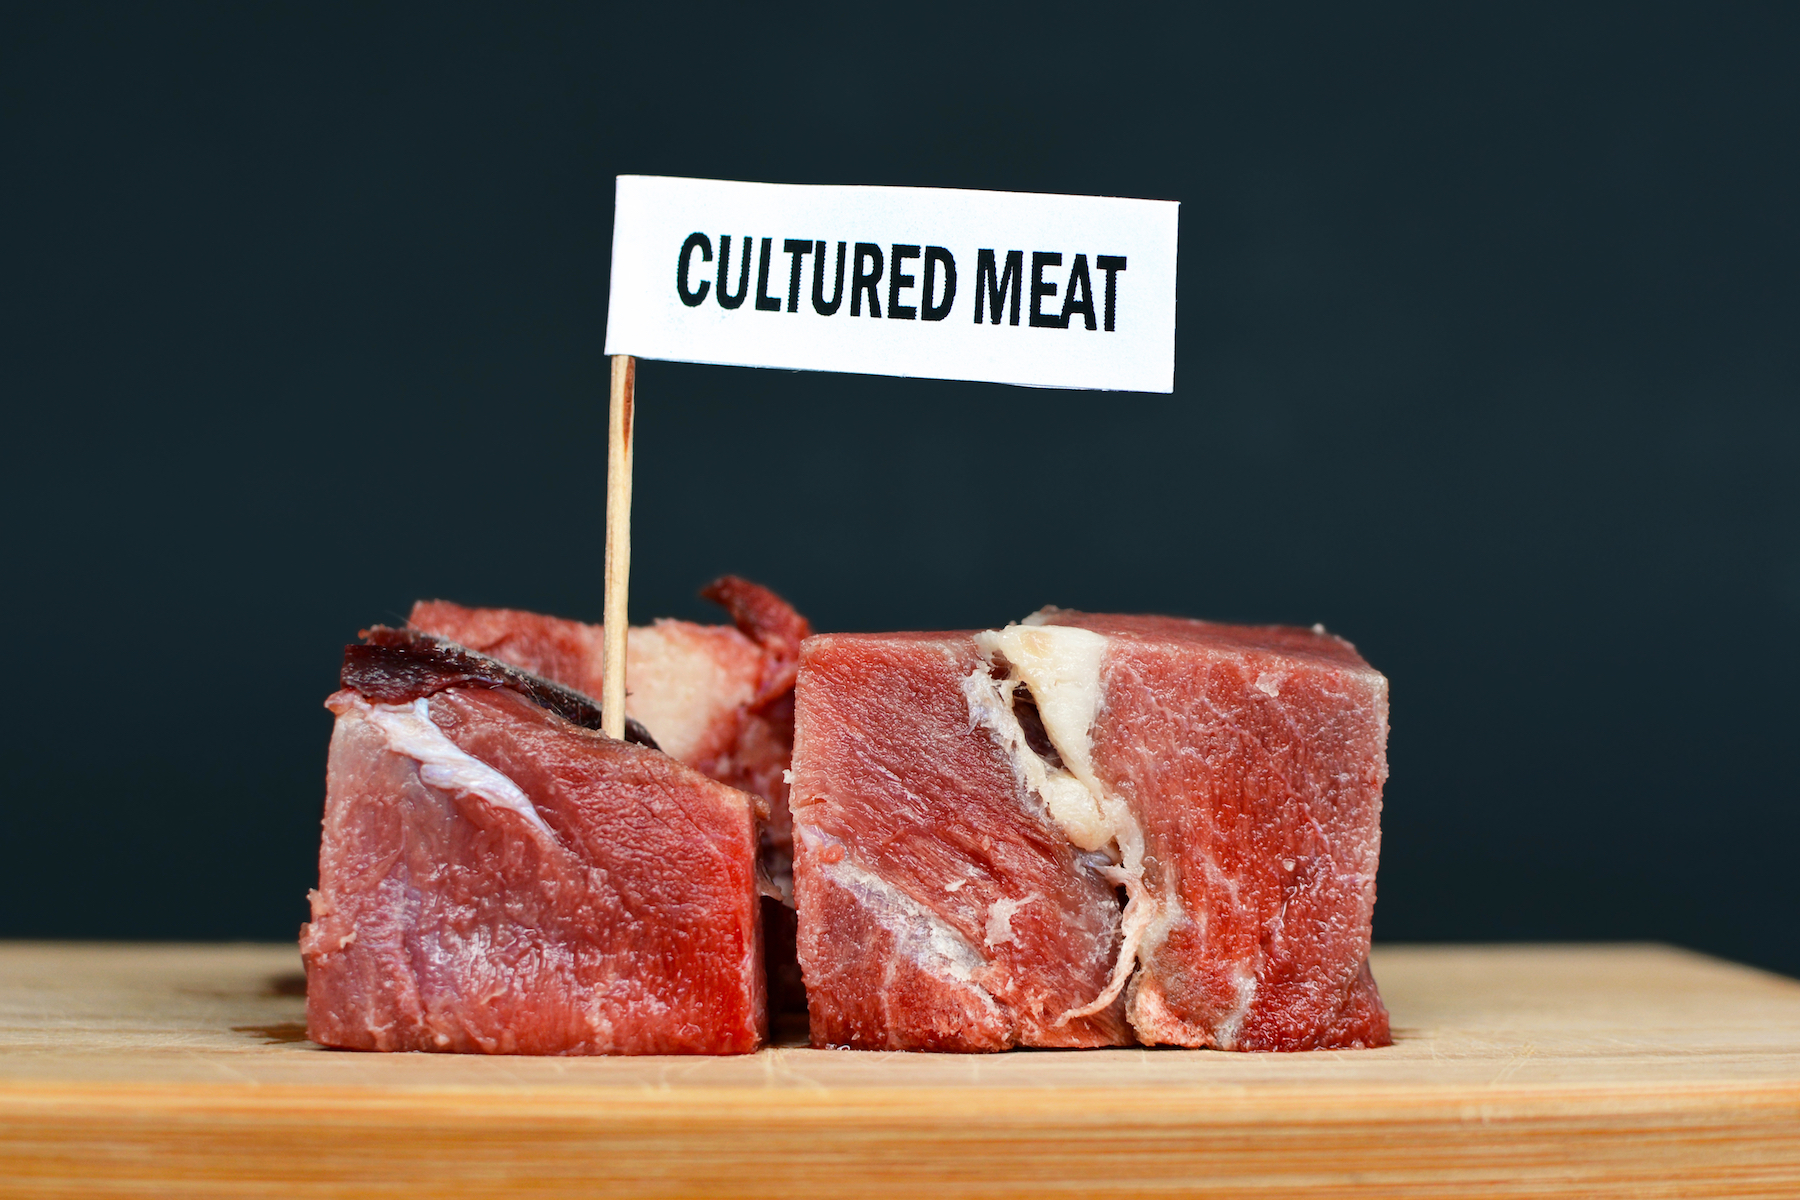 Image of cultured meat